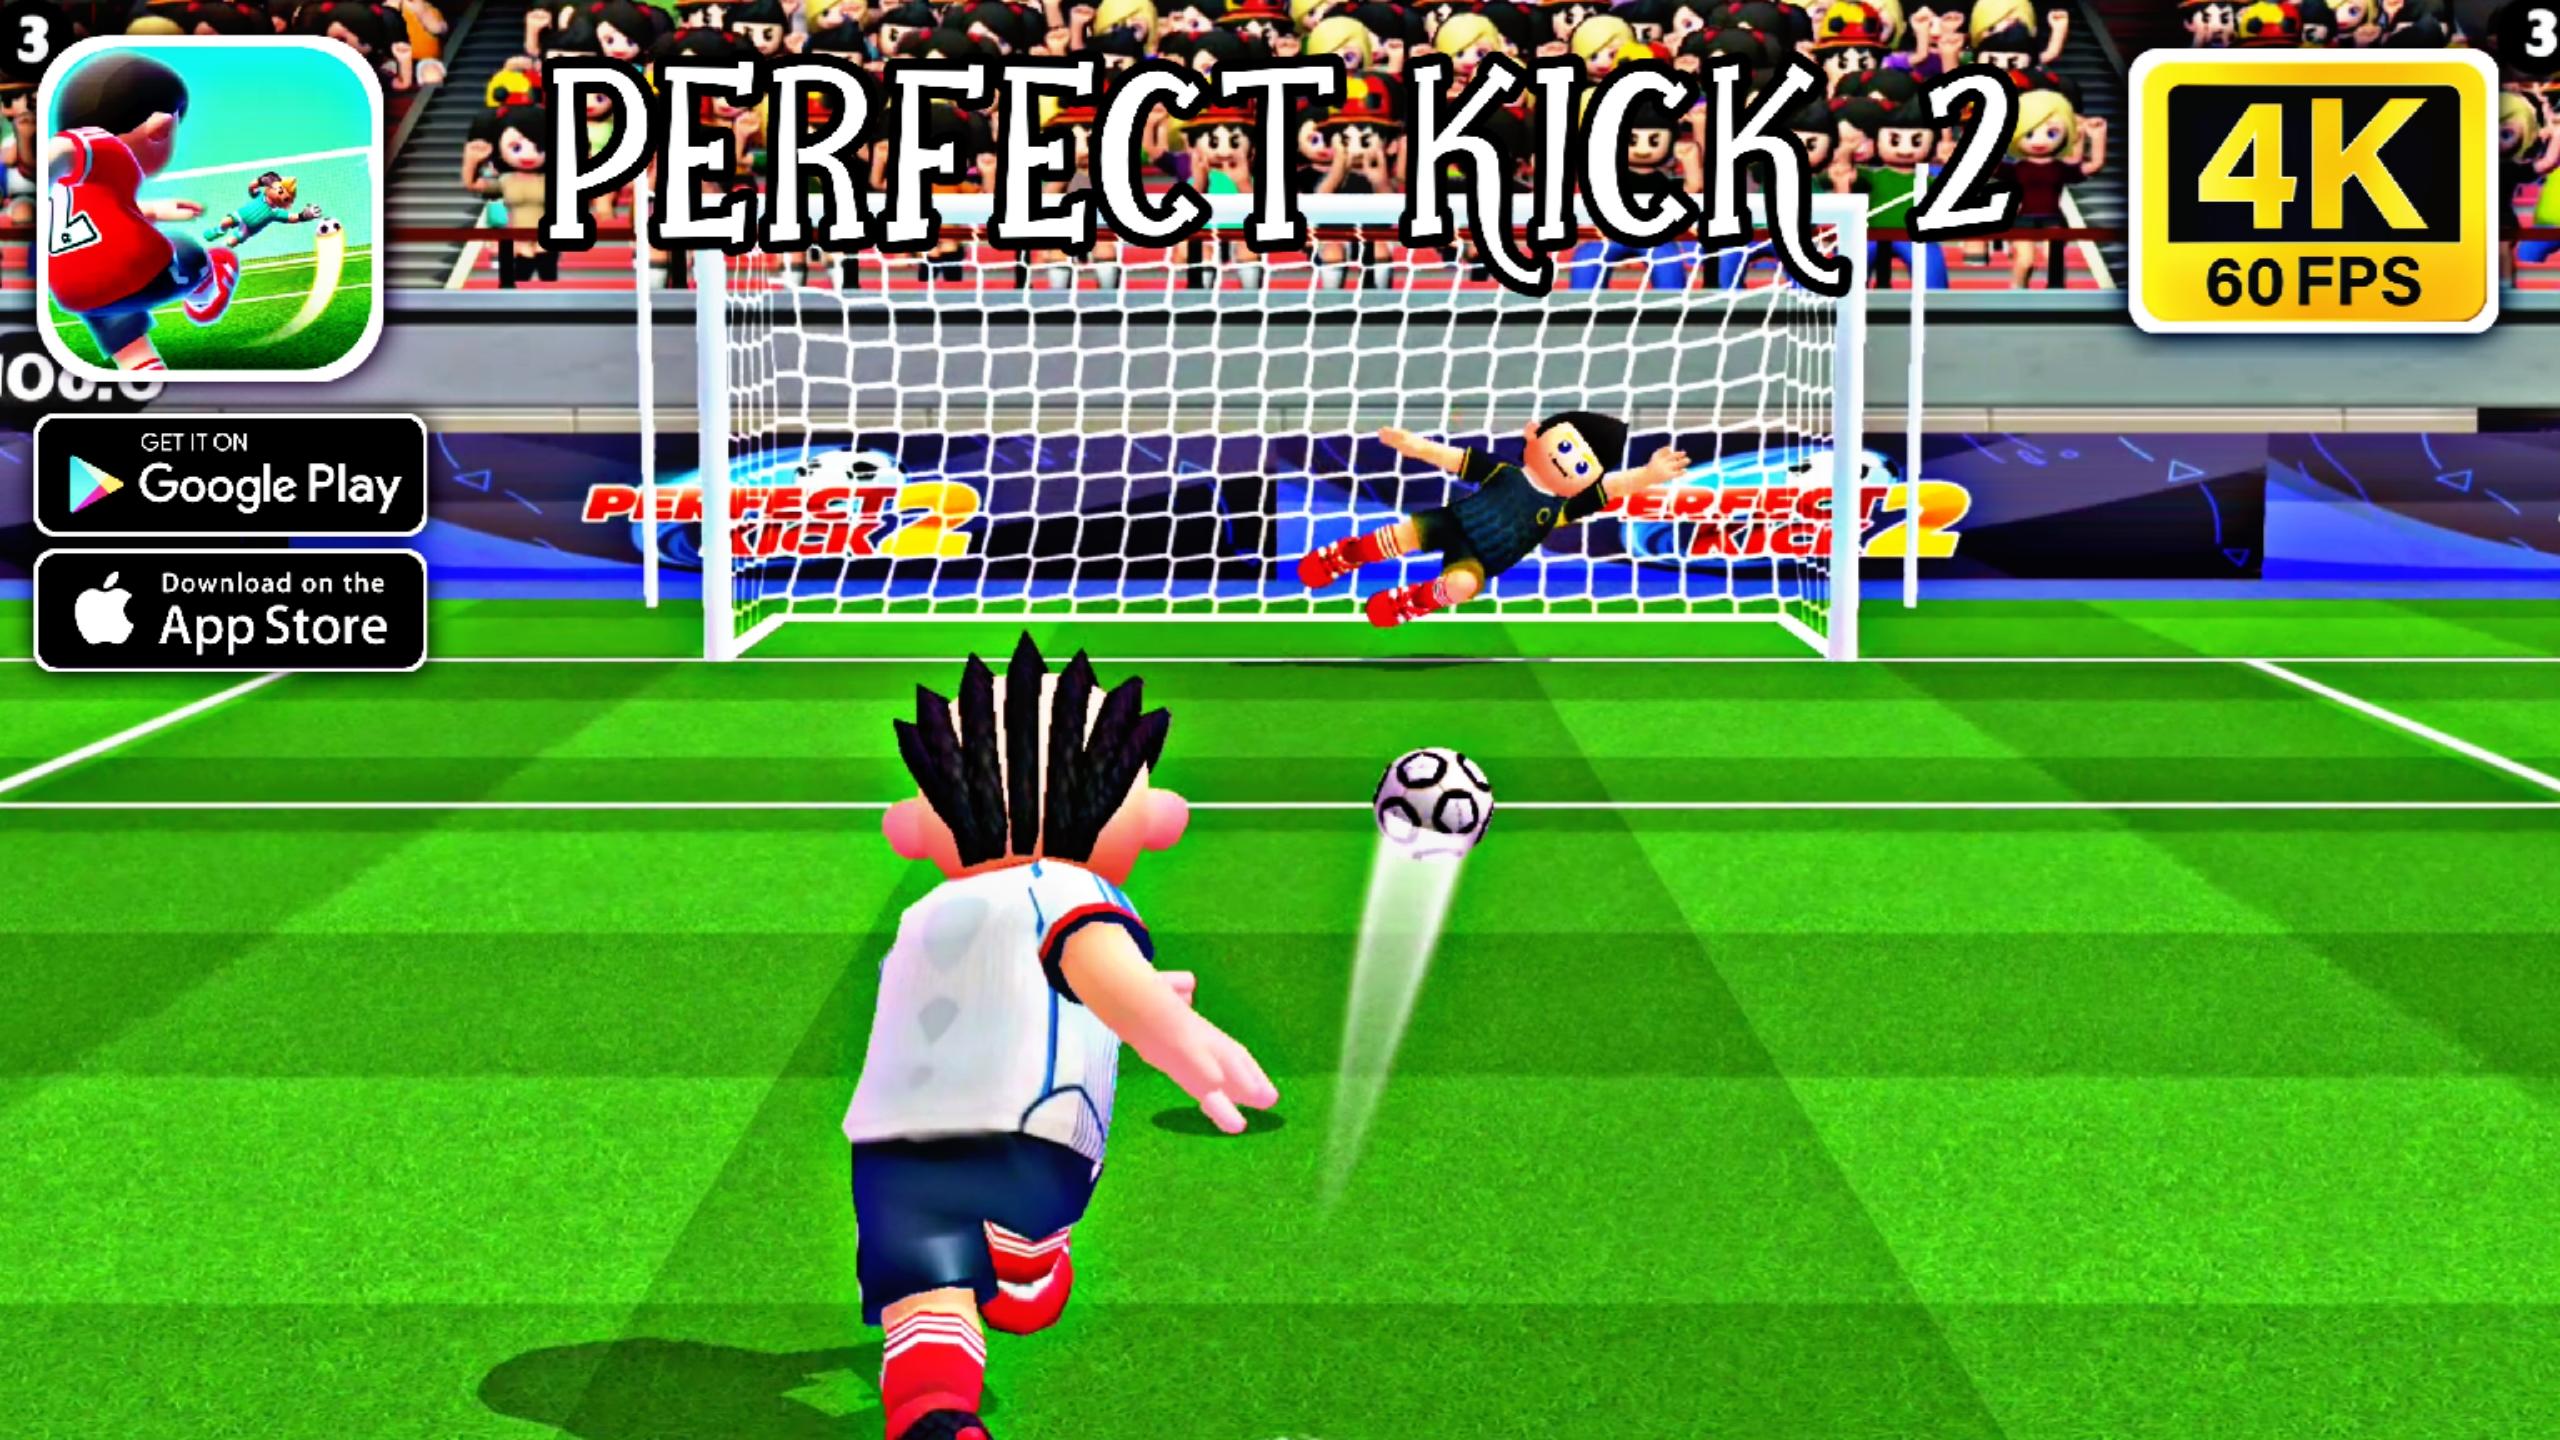 Play Score! Match - PvP Soccer Online for Free on PC & Mobile